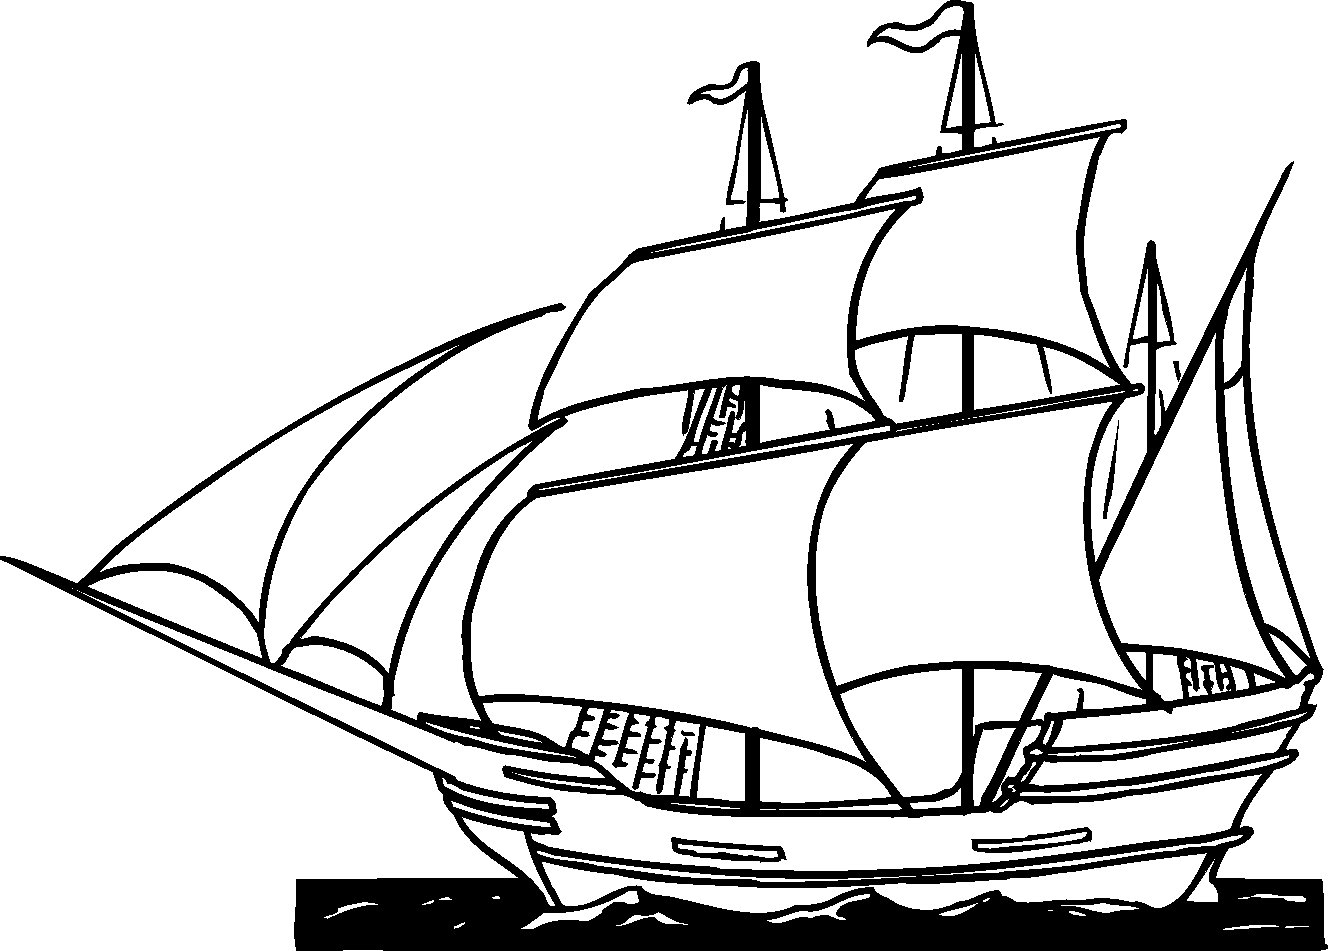 Ship coloring pages to download and print for free